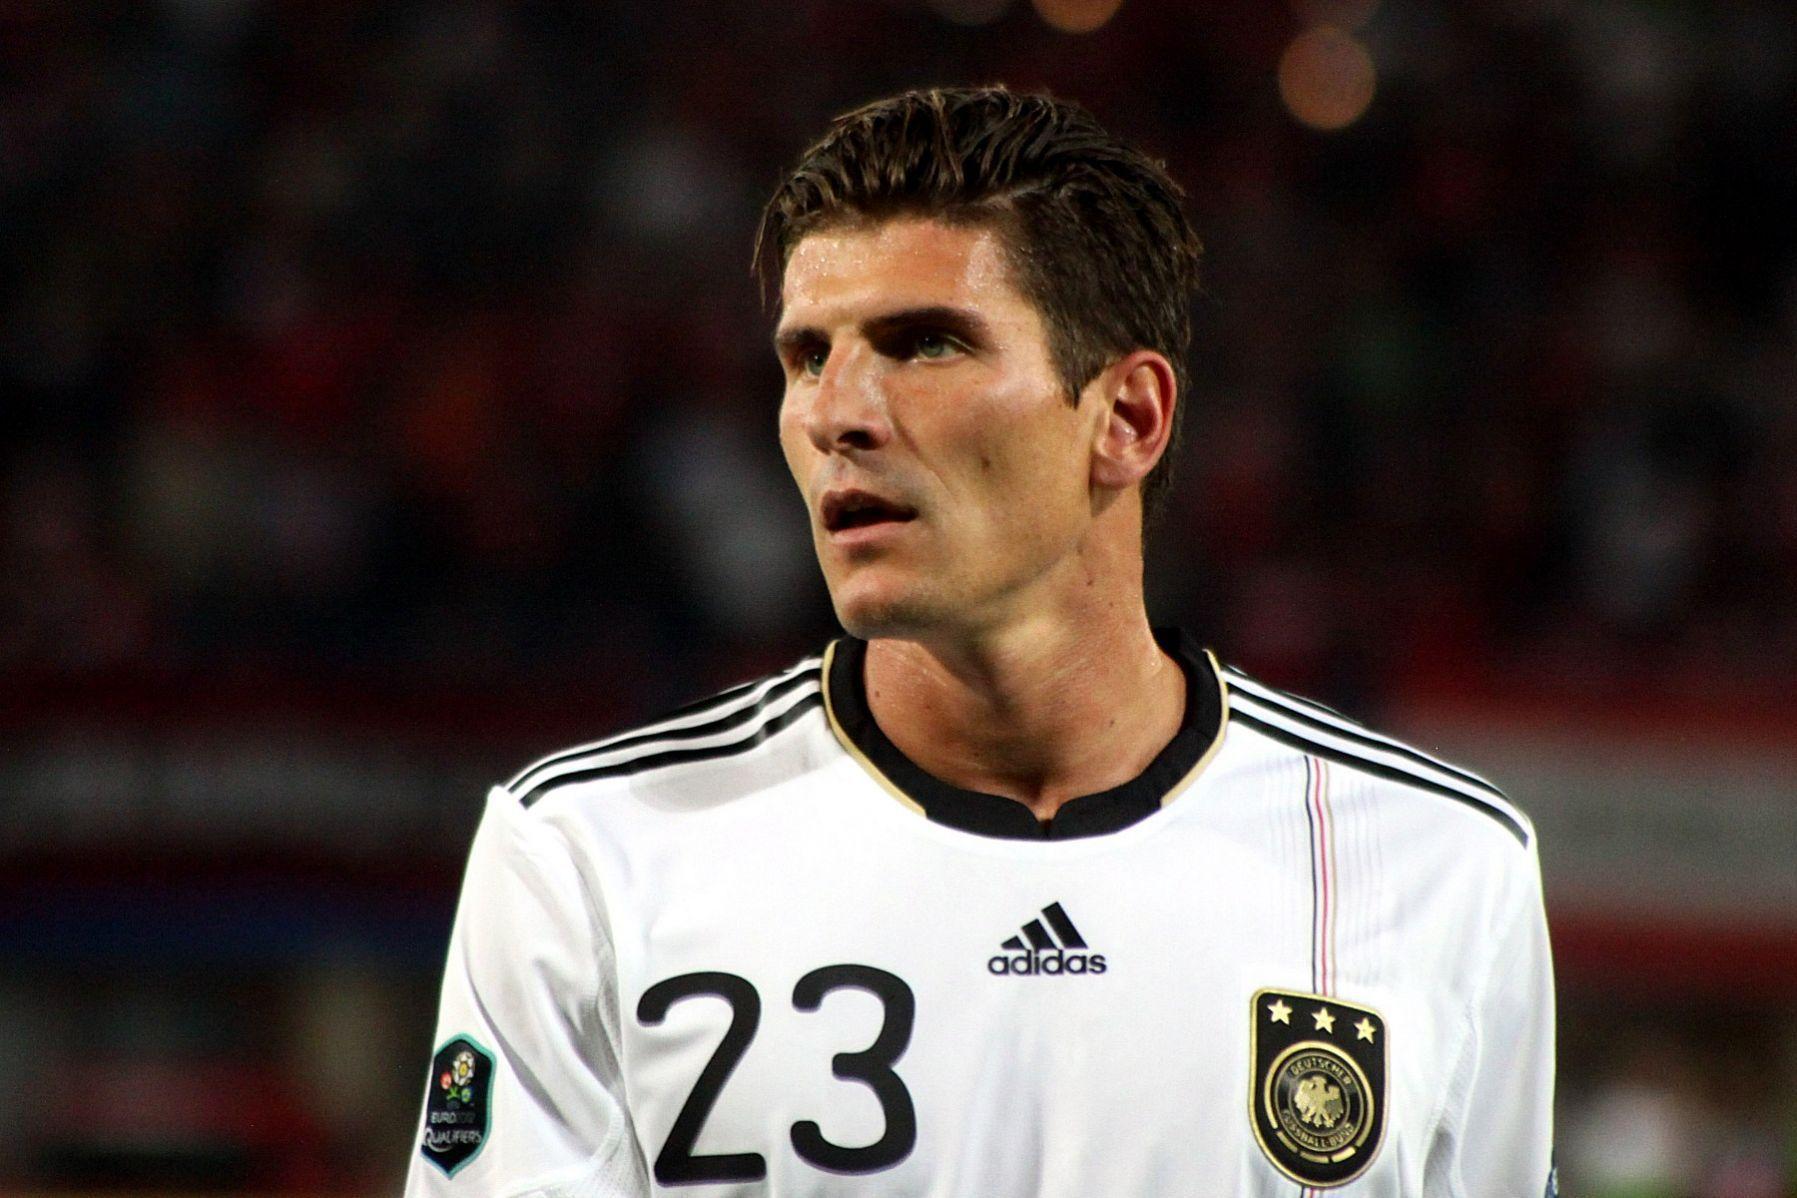 The best player of Fiorentina Mario Gomez wallpaper and image